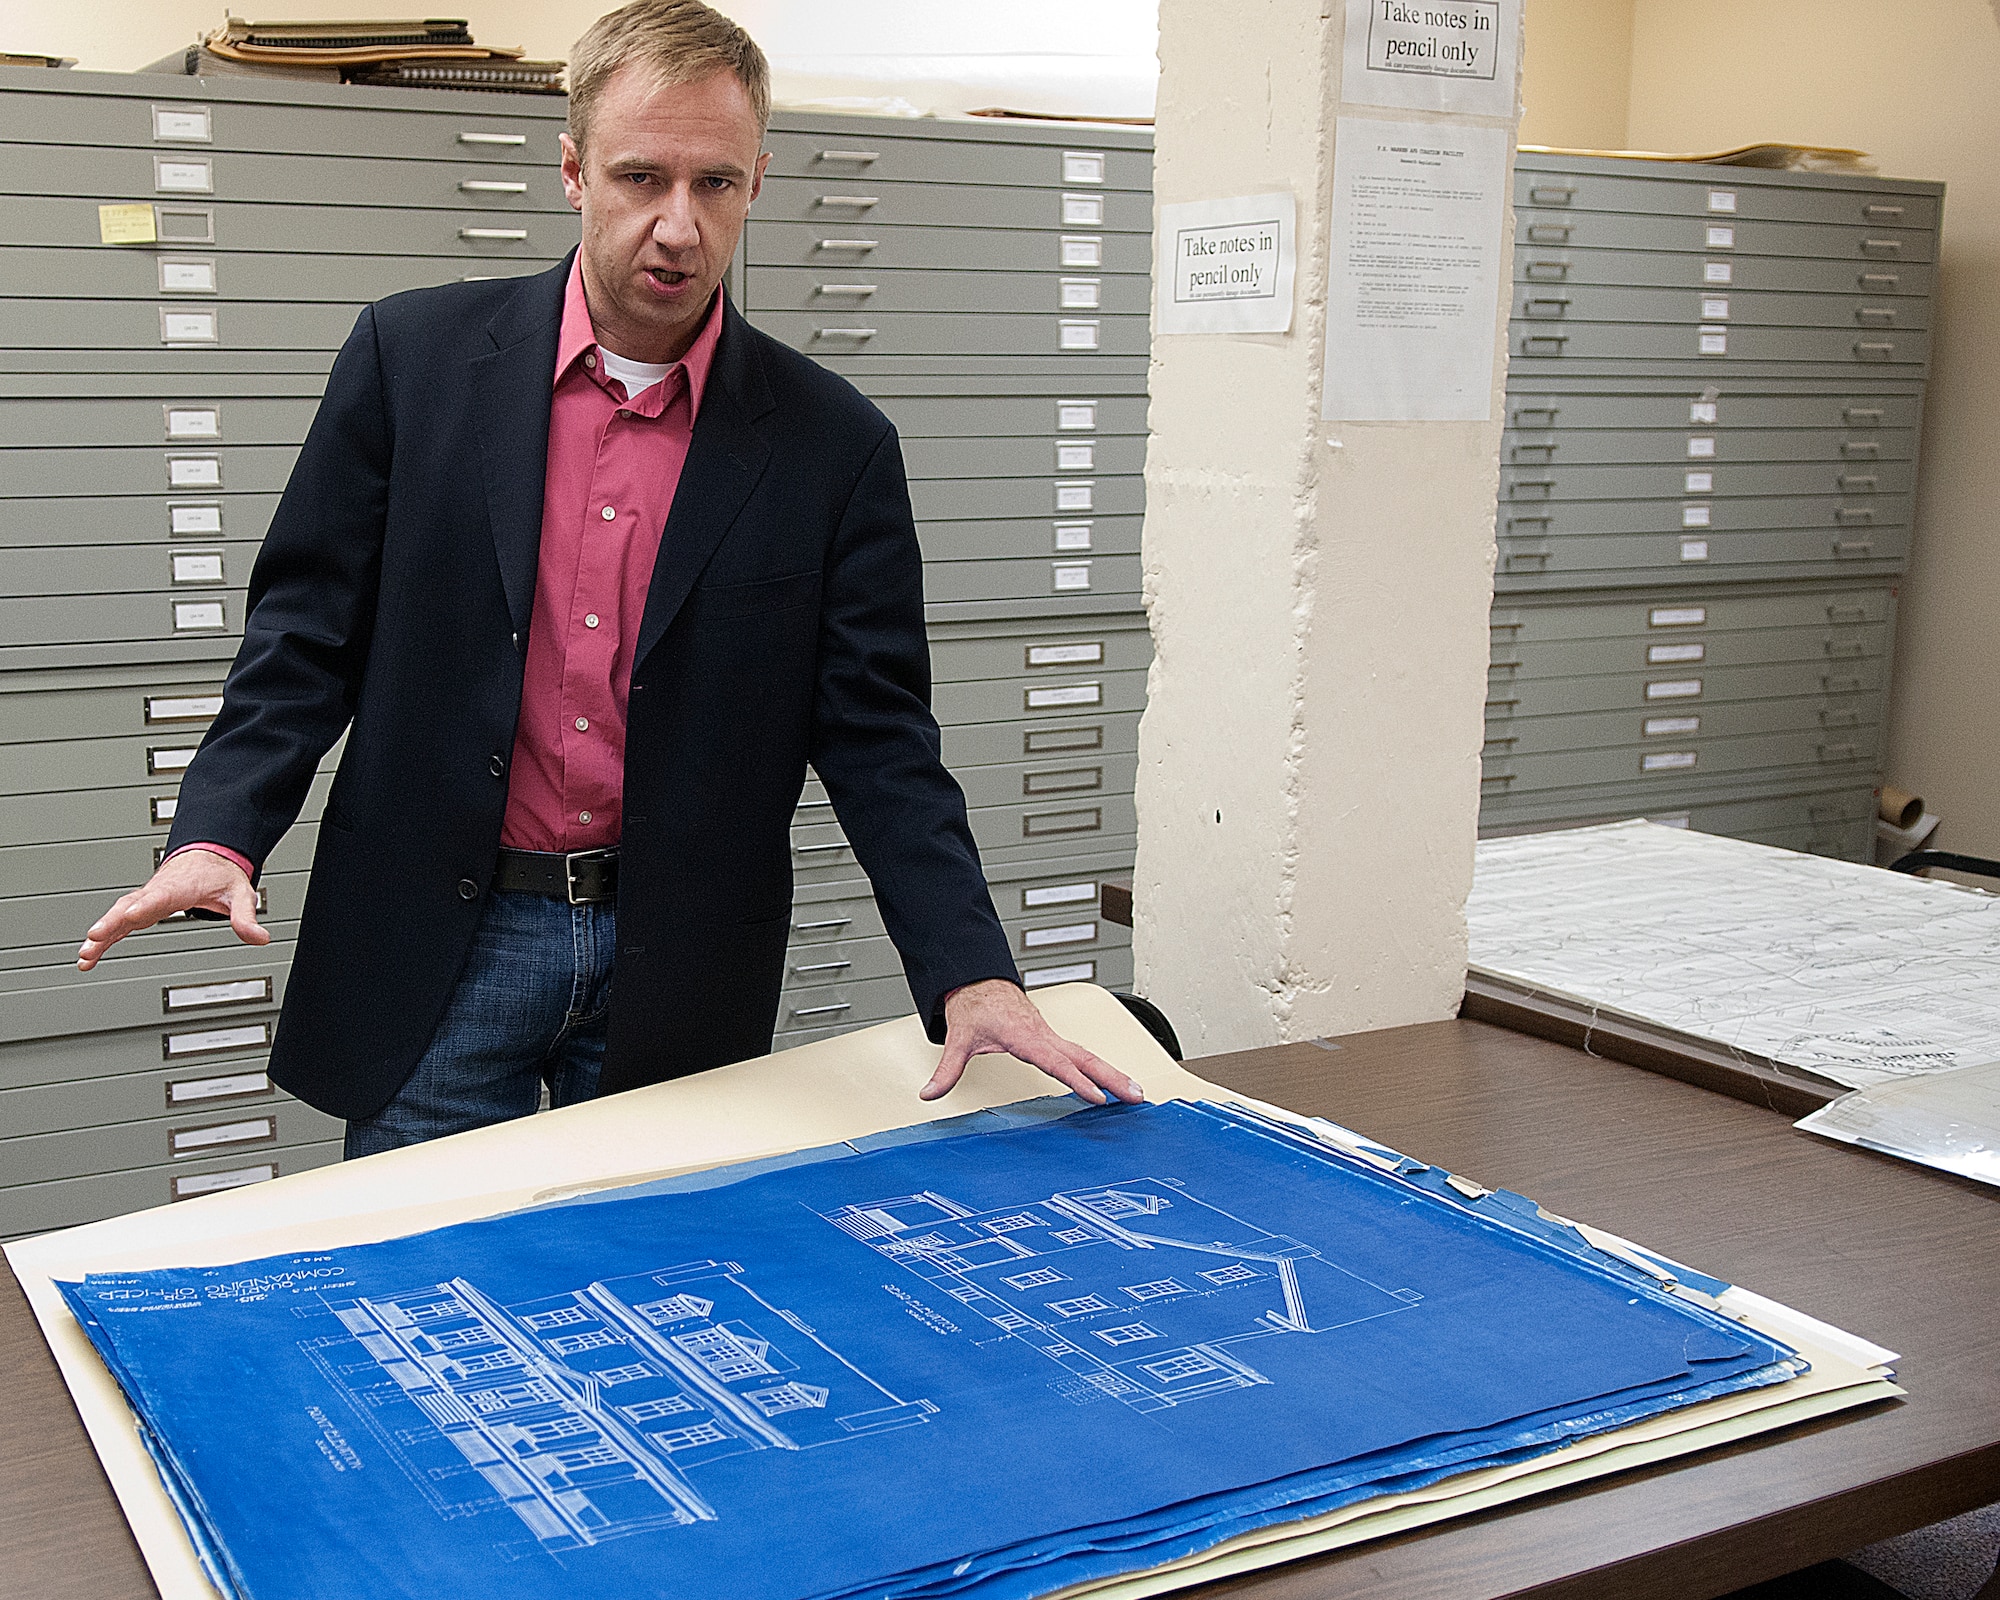 Travis Beckwith, 90th Civil Engineer Squadron cultural resources manager, in the document vault of the F. E. Warren curation facility known as “the bunker” stores blueprints dating back to 1908 March 27. Signs on the pillar next to Beckwith warn visitors to the vault to take notes in pencils only. “We are an archive.” Beckwith said. “Technically we are open to the public. We’ve got folks who come here every once in a while to do research.” (U.S. Air Force photo by R.J. Oriez)